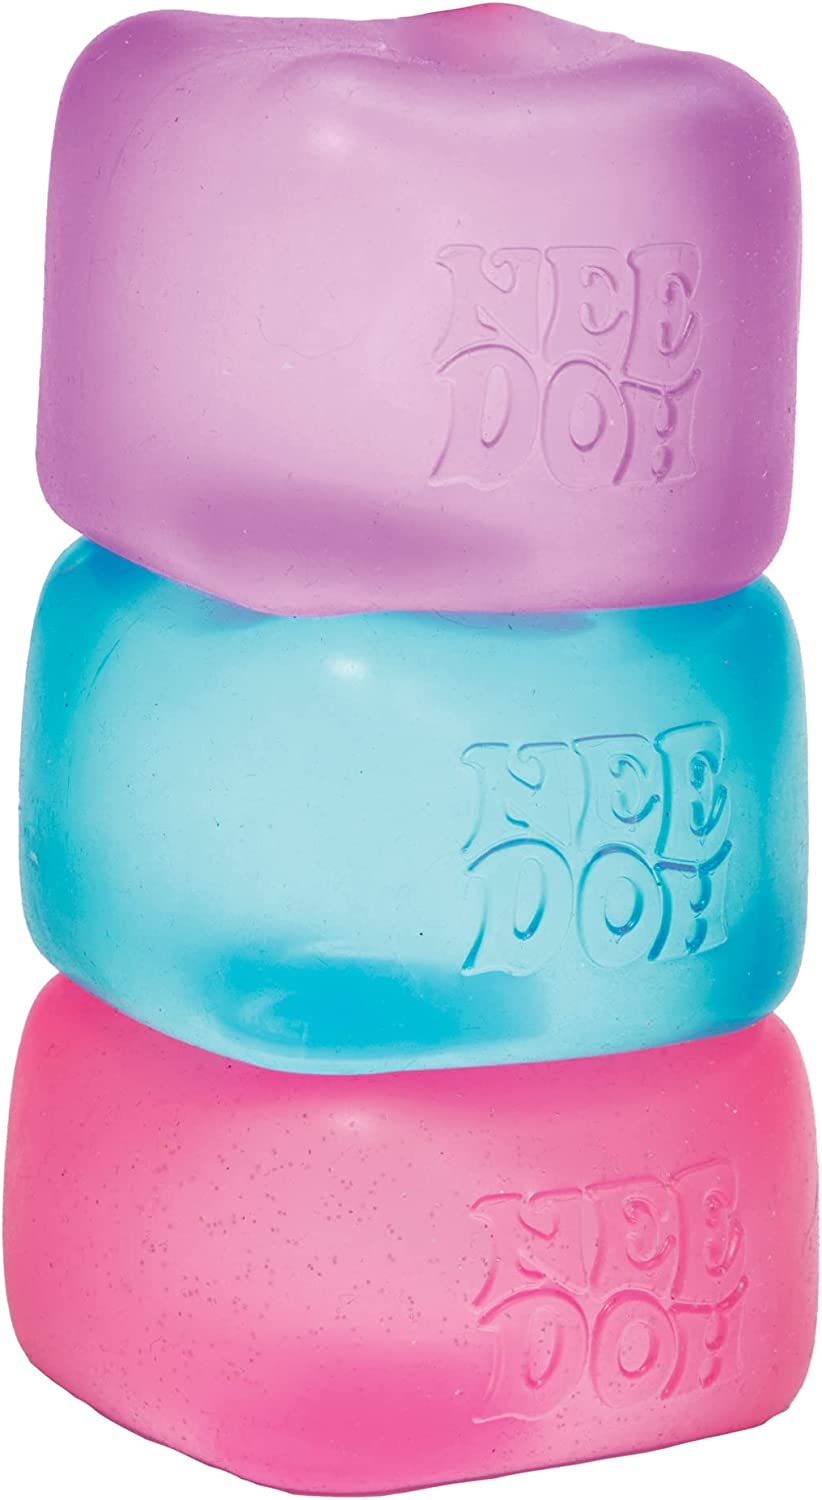 NeeDoh Nice Cube – Super Solid Squishy Stress Cube – Assorted Colors